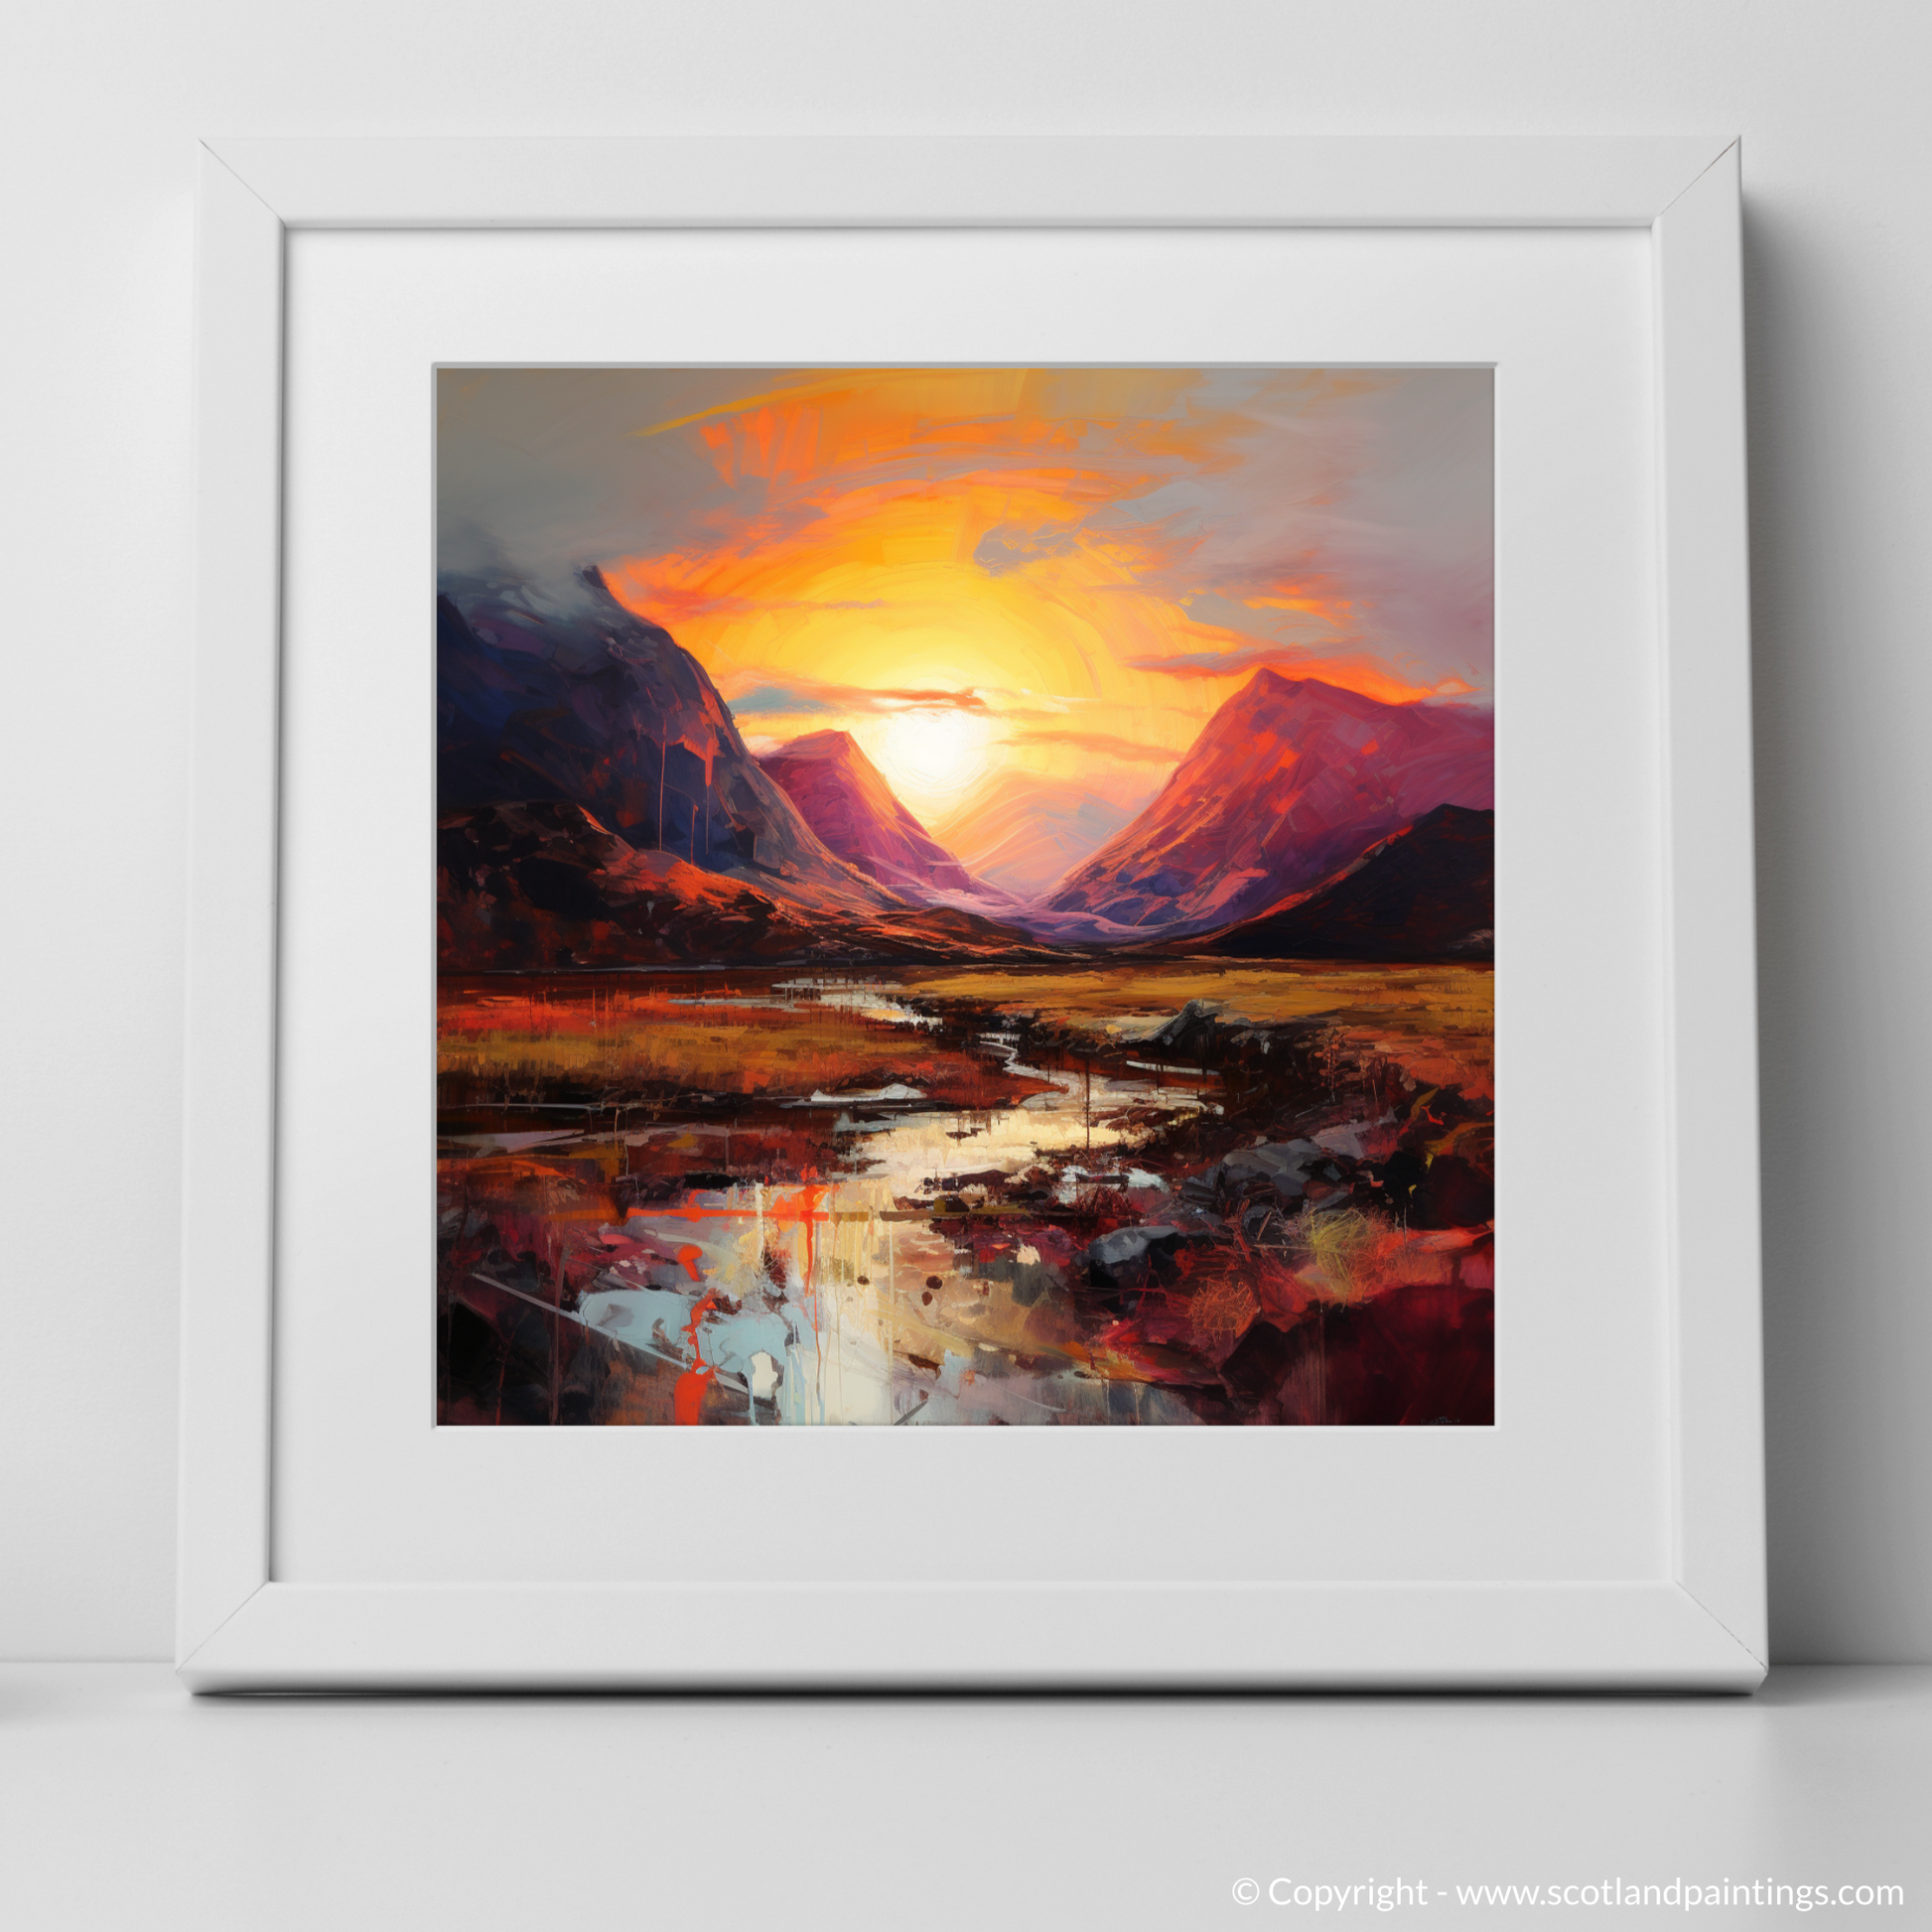 Art Print of Sunset glow in Glencoe with a white frame